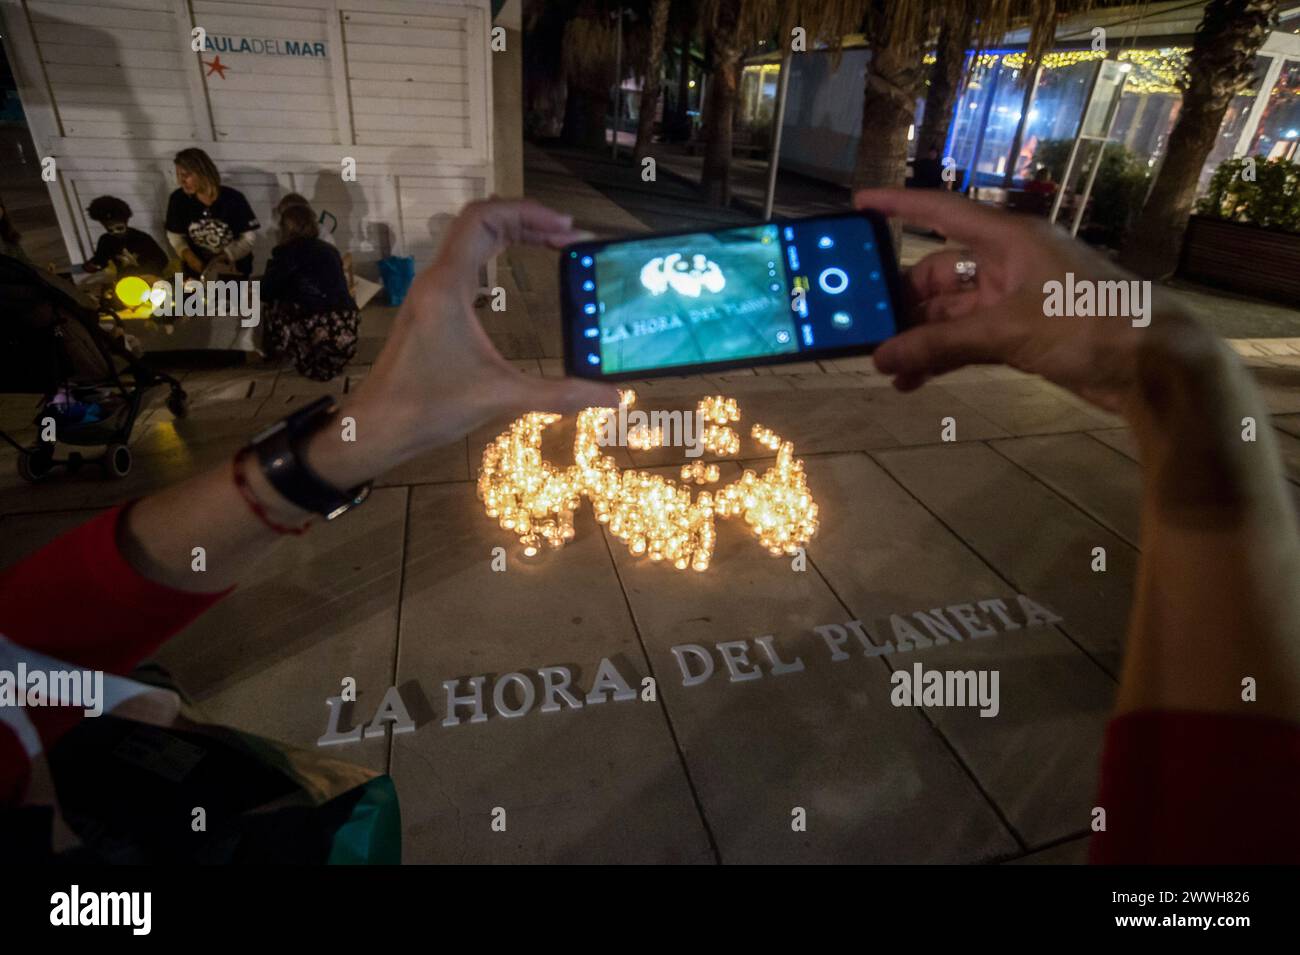 A member of the World Wildlife Foundation (WWF) is seen taking a photo of a mosaic made with candles depicting a panda during the Earth Hour in the centre of Malaga. The figure made with candles is a panda, the symbol of the WWF. Thousands of cities around the world switched off their electric lights during the Earth Hour to highlight the dangers of climate change. The figure made with candles is a panda, the symbol of the WWF. Thousands of cities worldwide switched off their electric lights during Earth Hour to highlight the dangers of climate change. Stock Photo